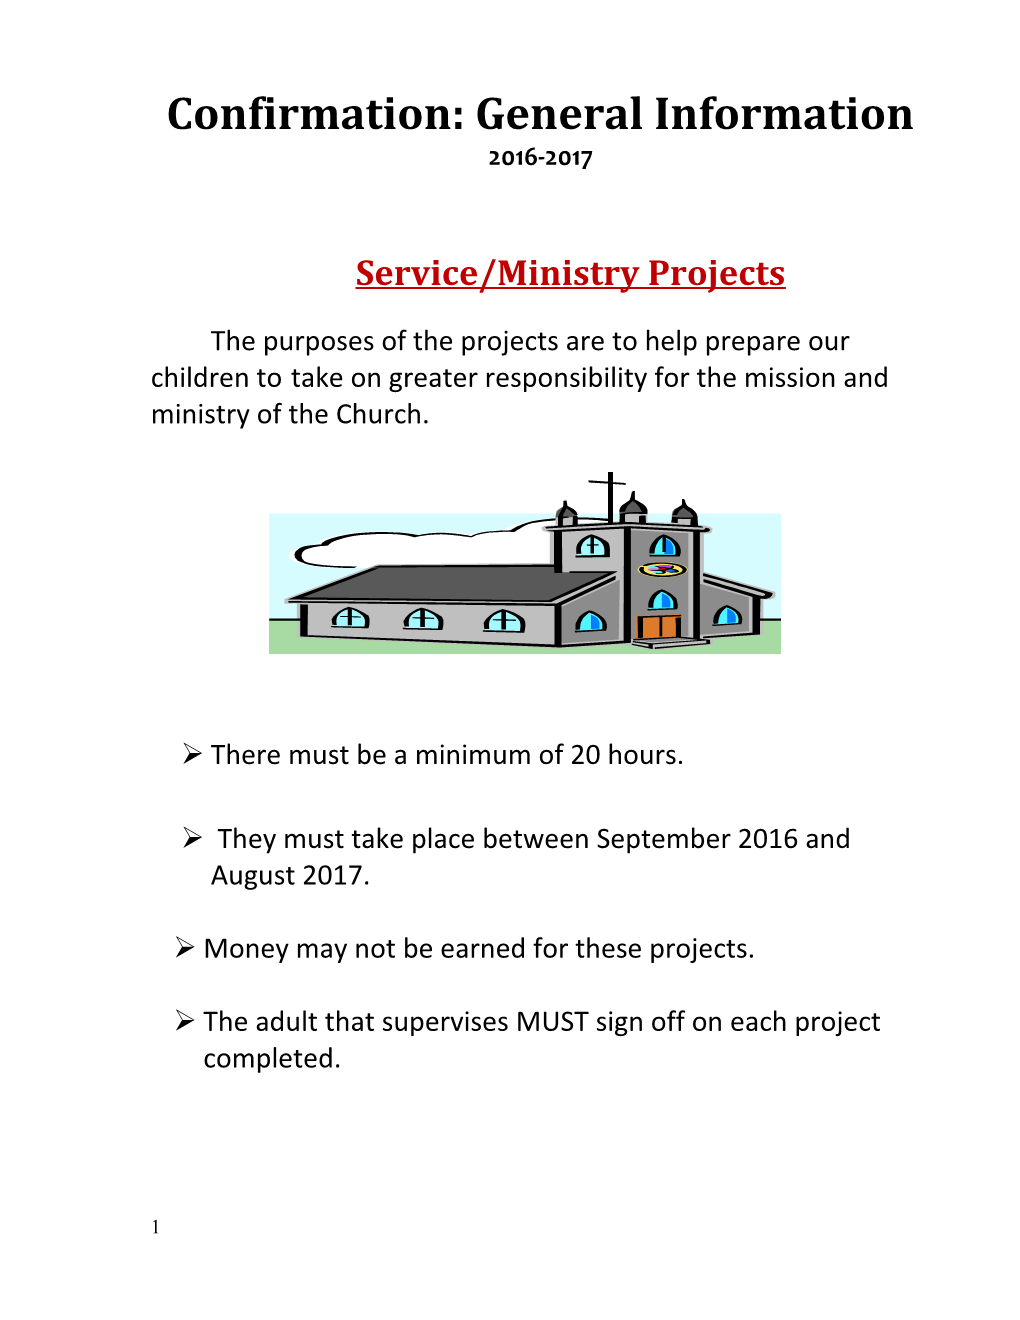 Service Projects for Confirmation